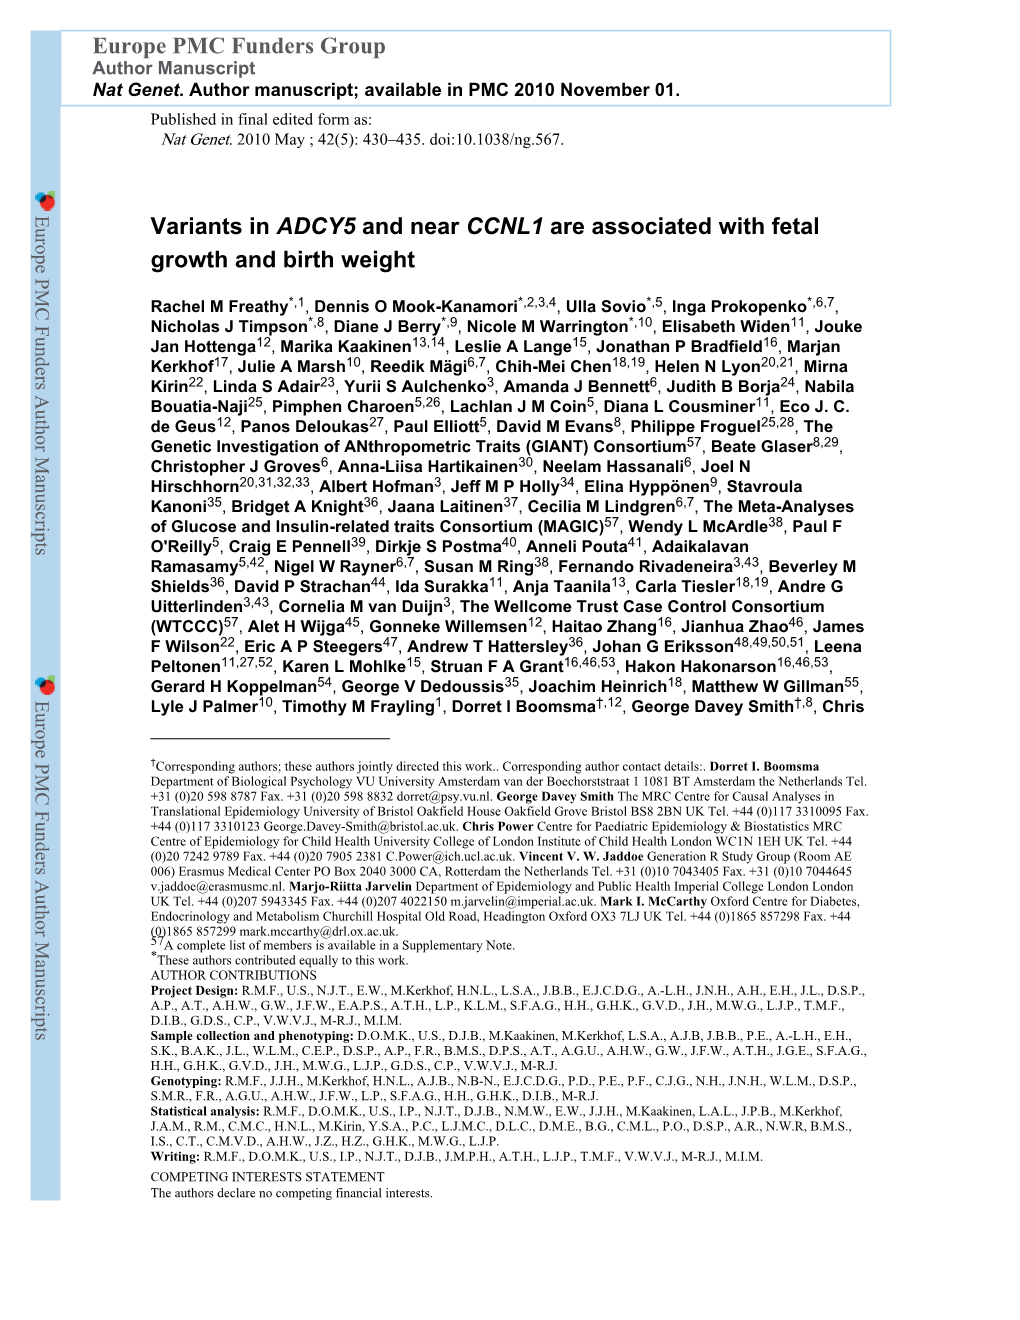 Variants in ADCY5 and Near CCNL1 Are Associated with Fetal Growth and Birth Weight